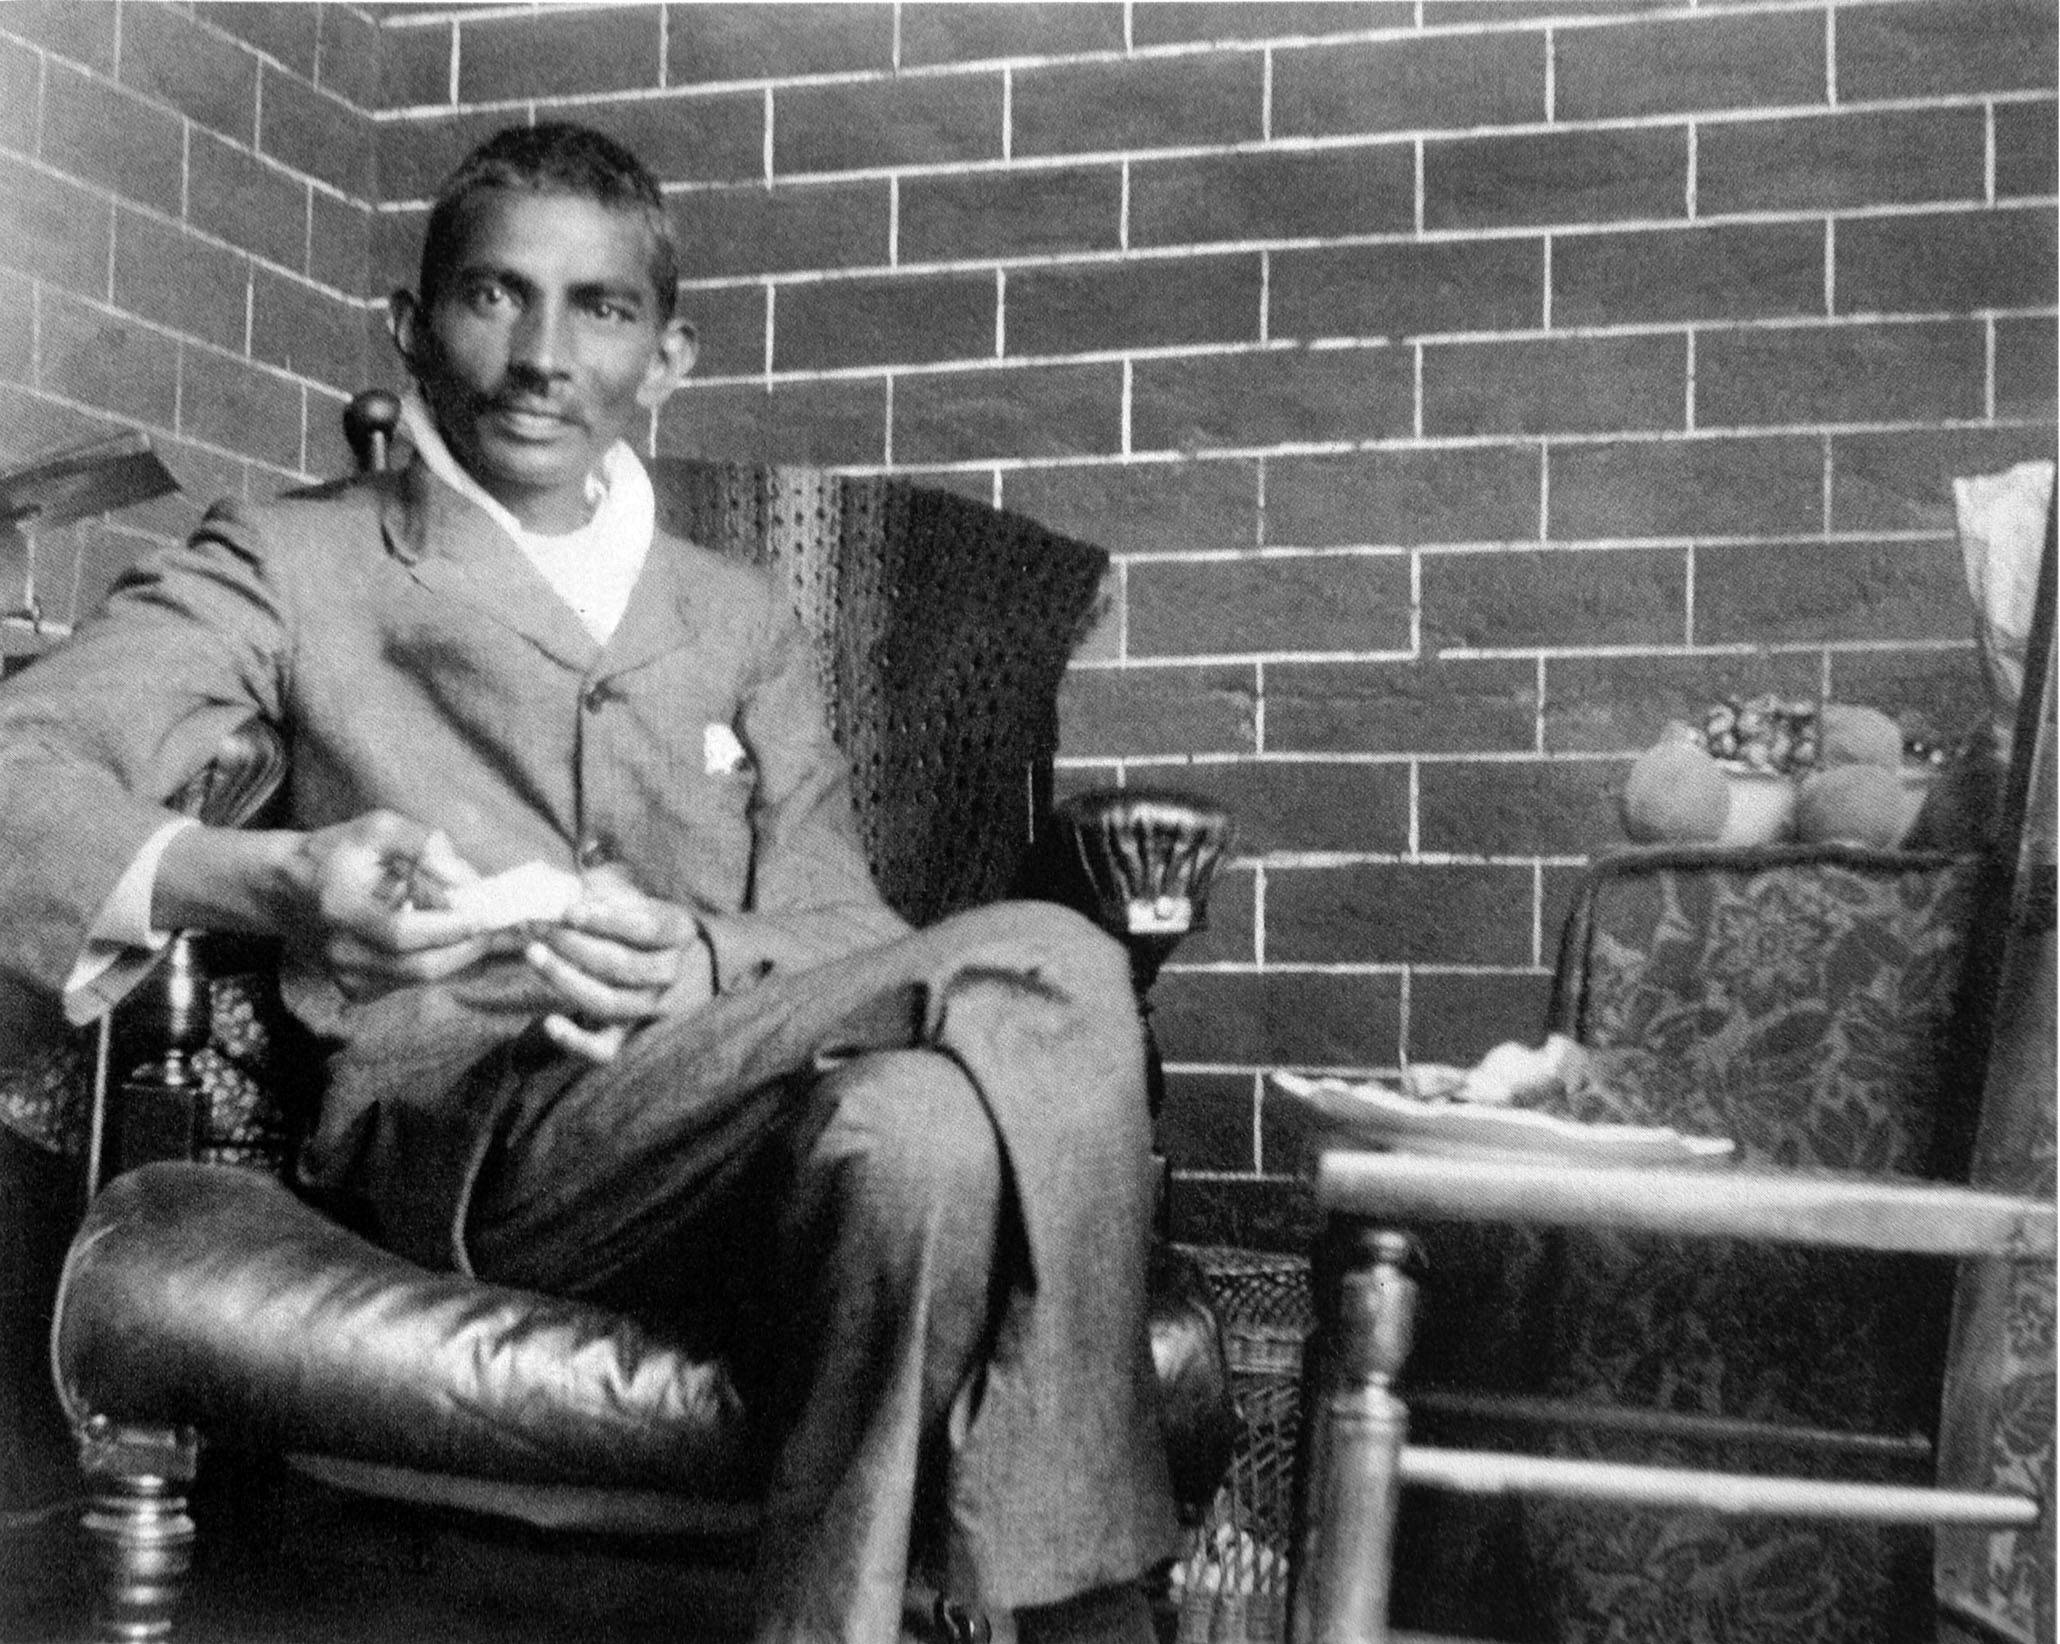 As a young lawyer in South Africa, Gandhi took up the fight against racial oppression. Image: Photographer unknown/Wikimedia Commons